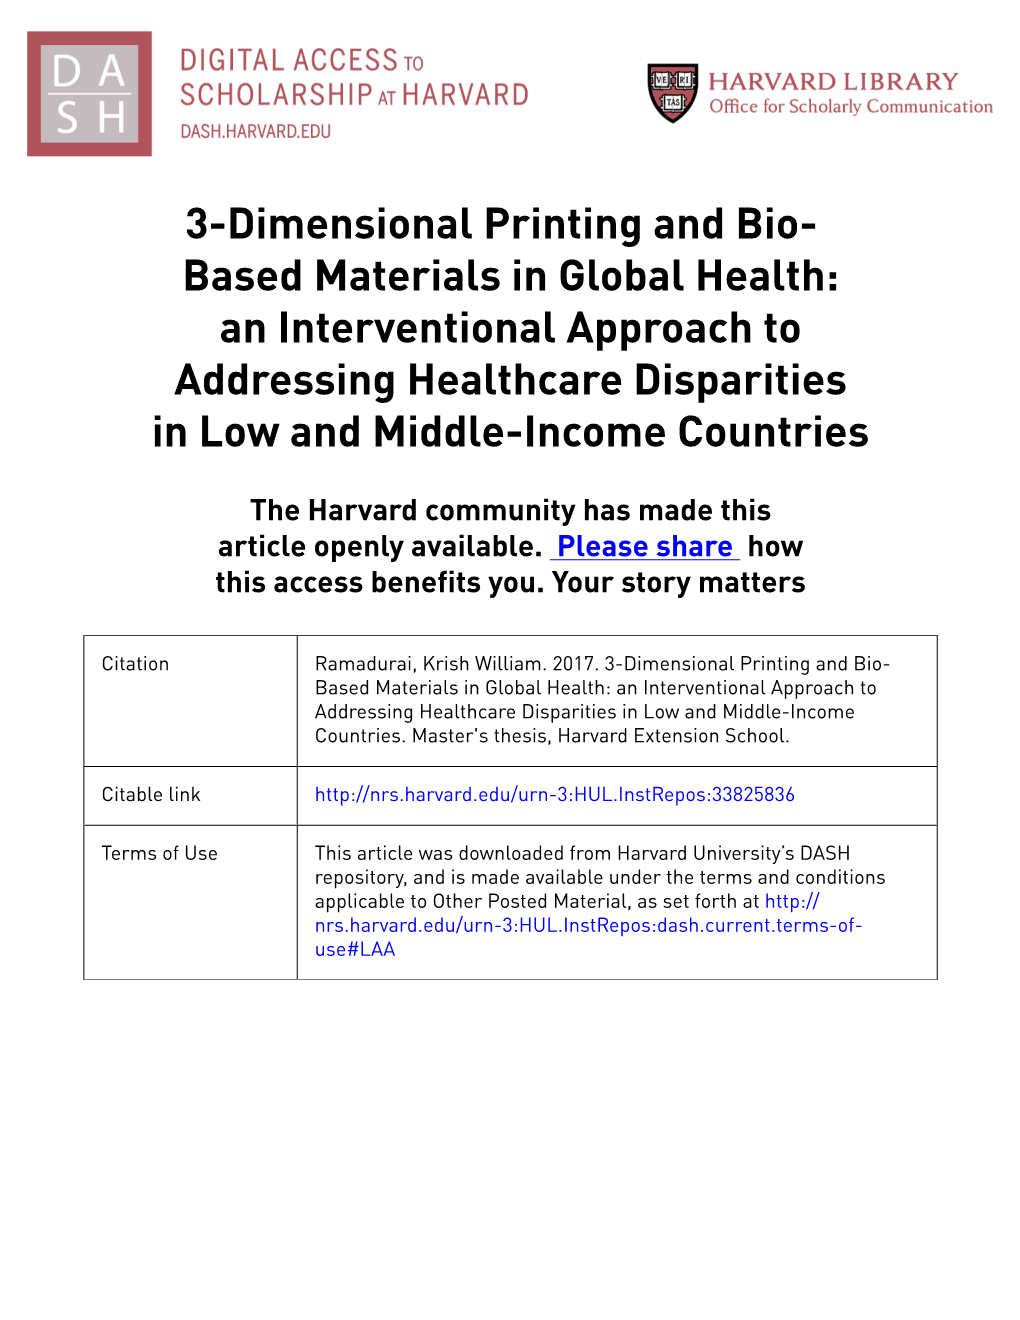 3-Dimensional Printing and Bio- Based Materials in Global Health: an Interventional Approach to Addressing Healthcare Disparities in Low and Middle-Income Countries